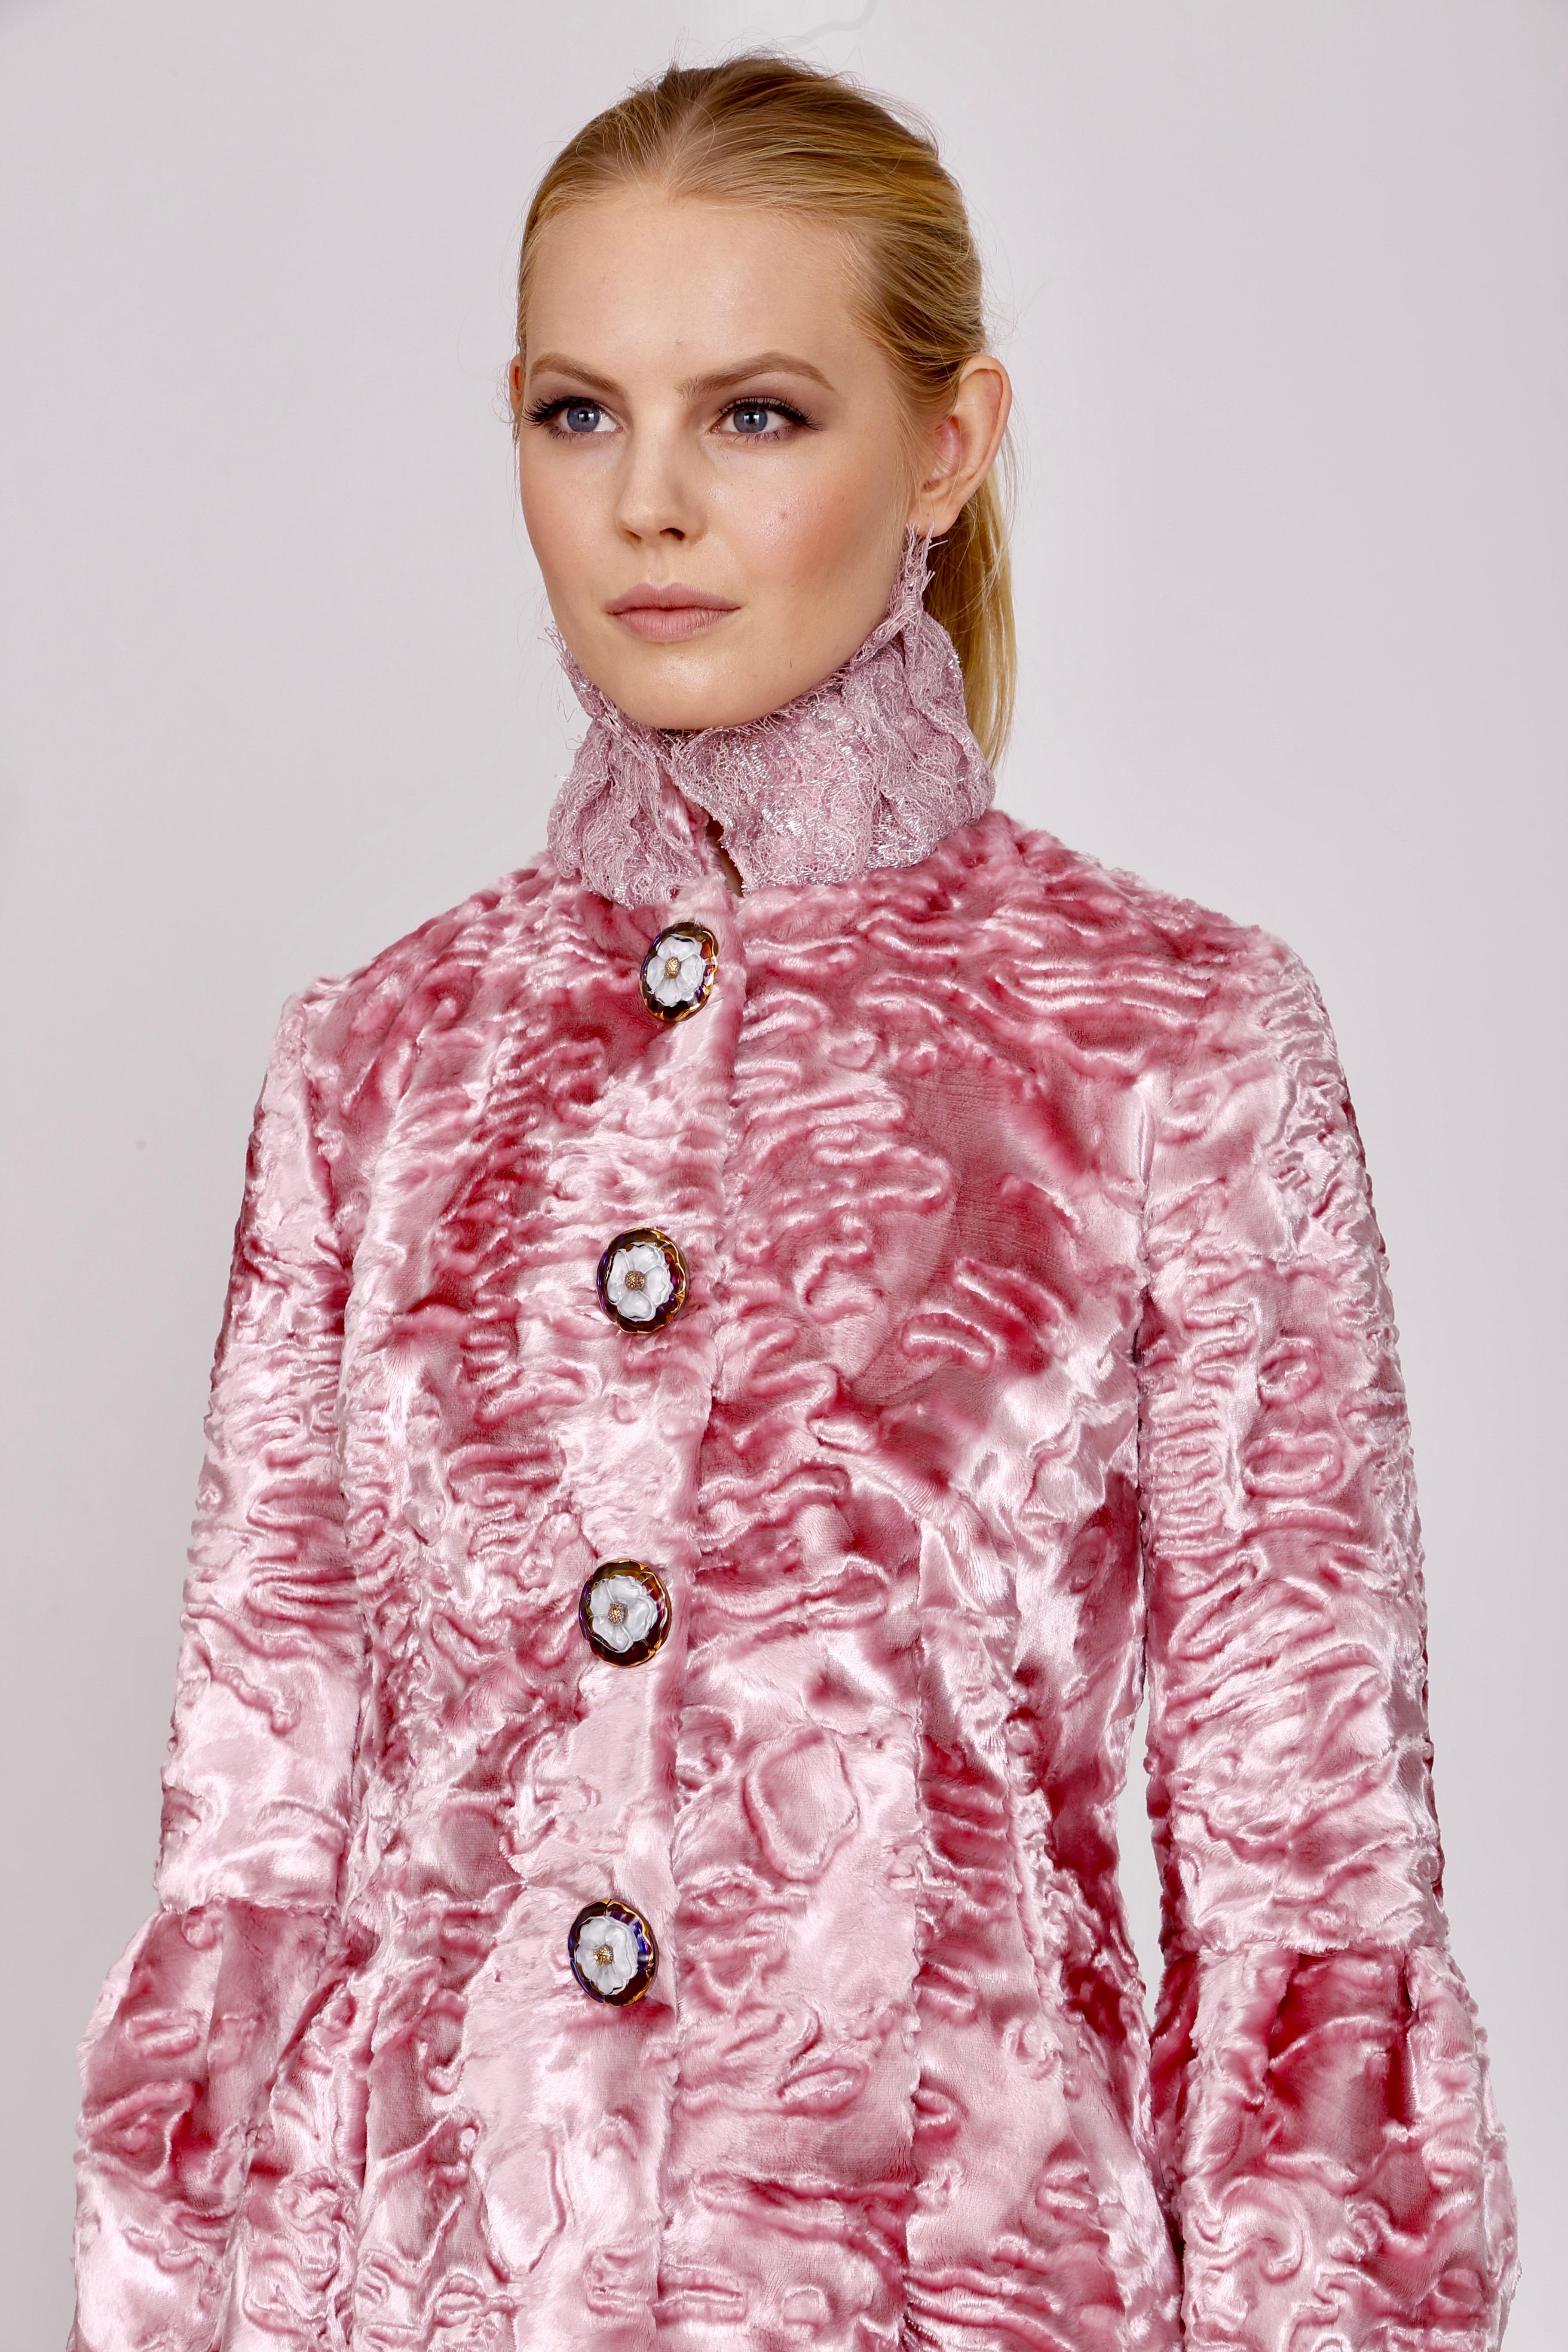 The Veronica Pelush pink faux fur coat with vintage glass buttons is a one of a kind exclusive piece. This eye-catching unique fitted fake faux fur coat is crafted with the highest quality custom made pelage for Pelush. The rich and sumptuous